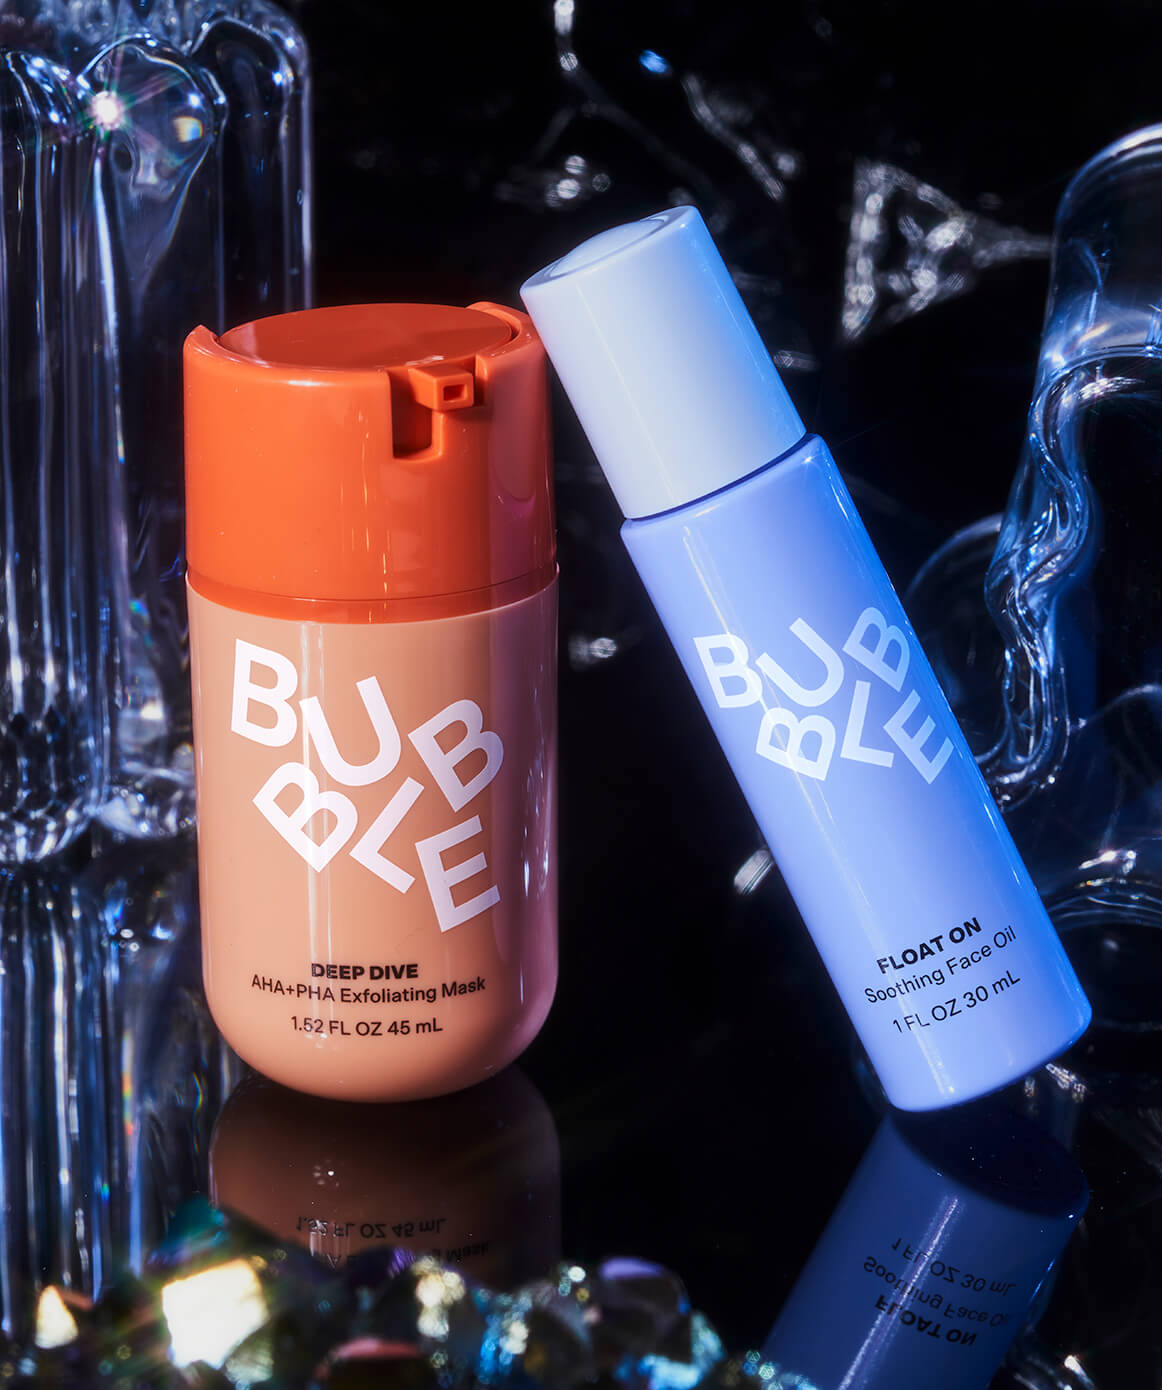 The Best Bubble Skincare Products, According To You - Beauty Bay